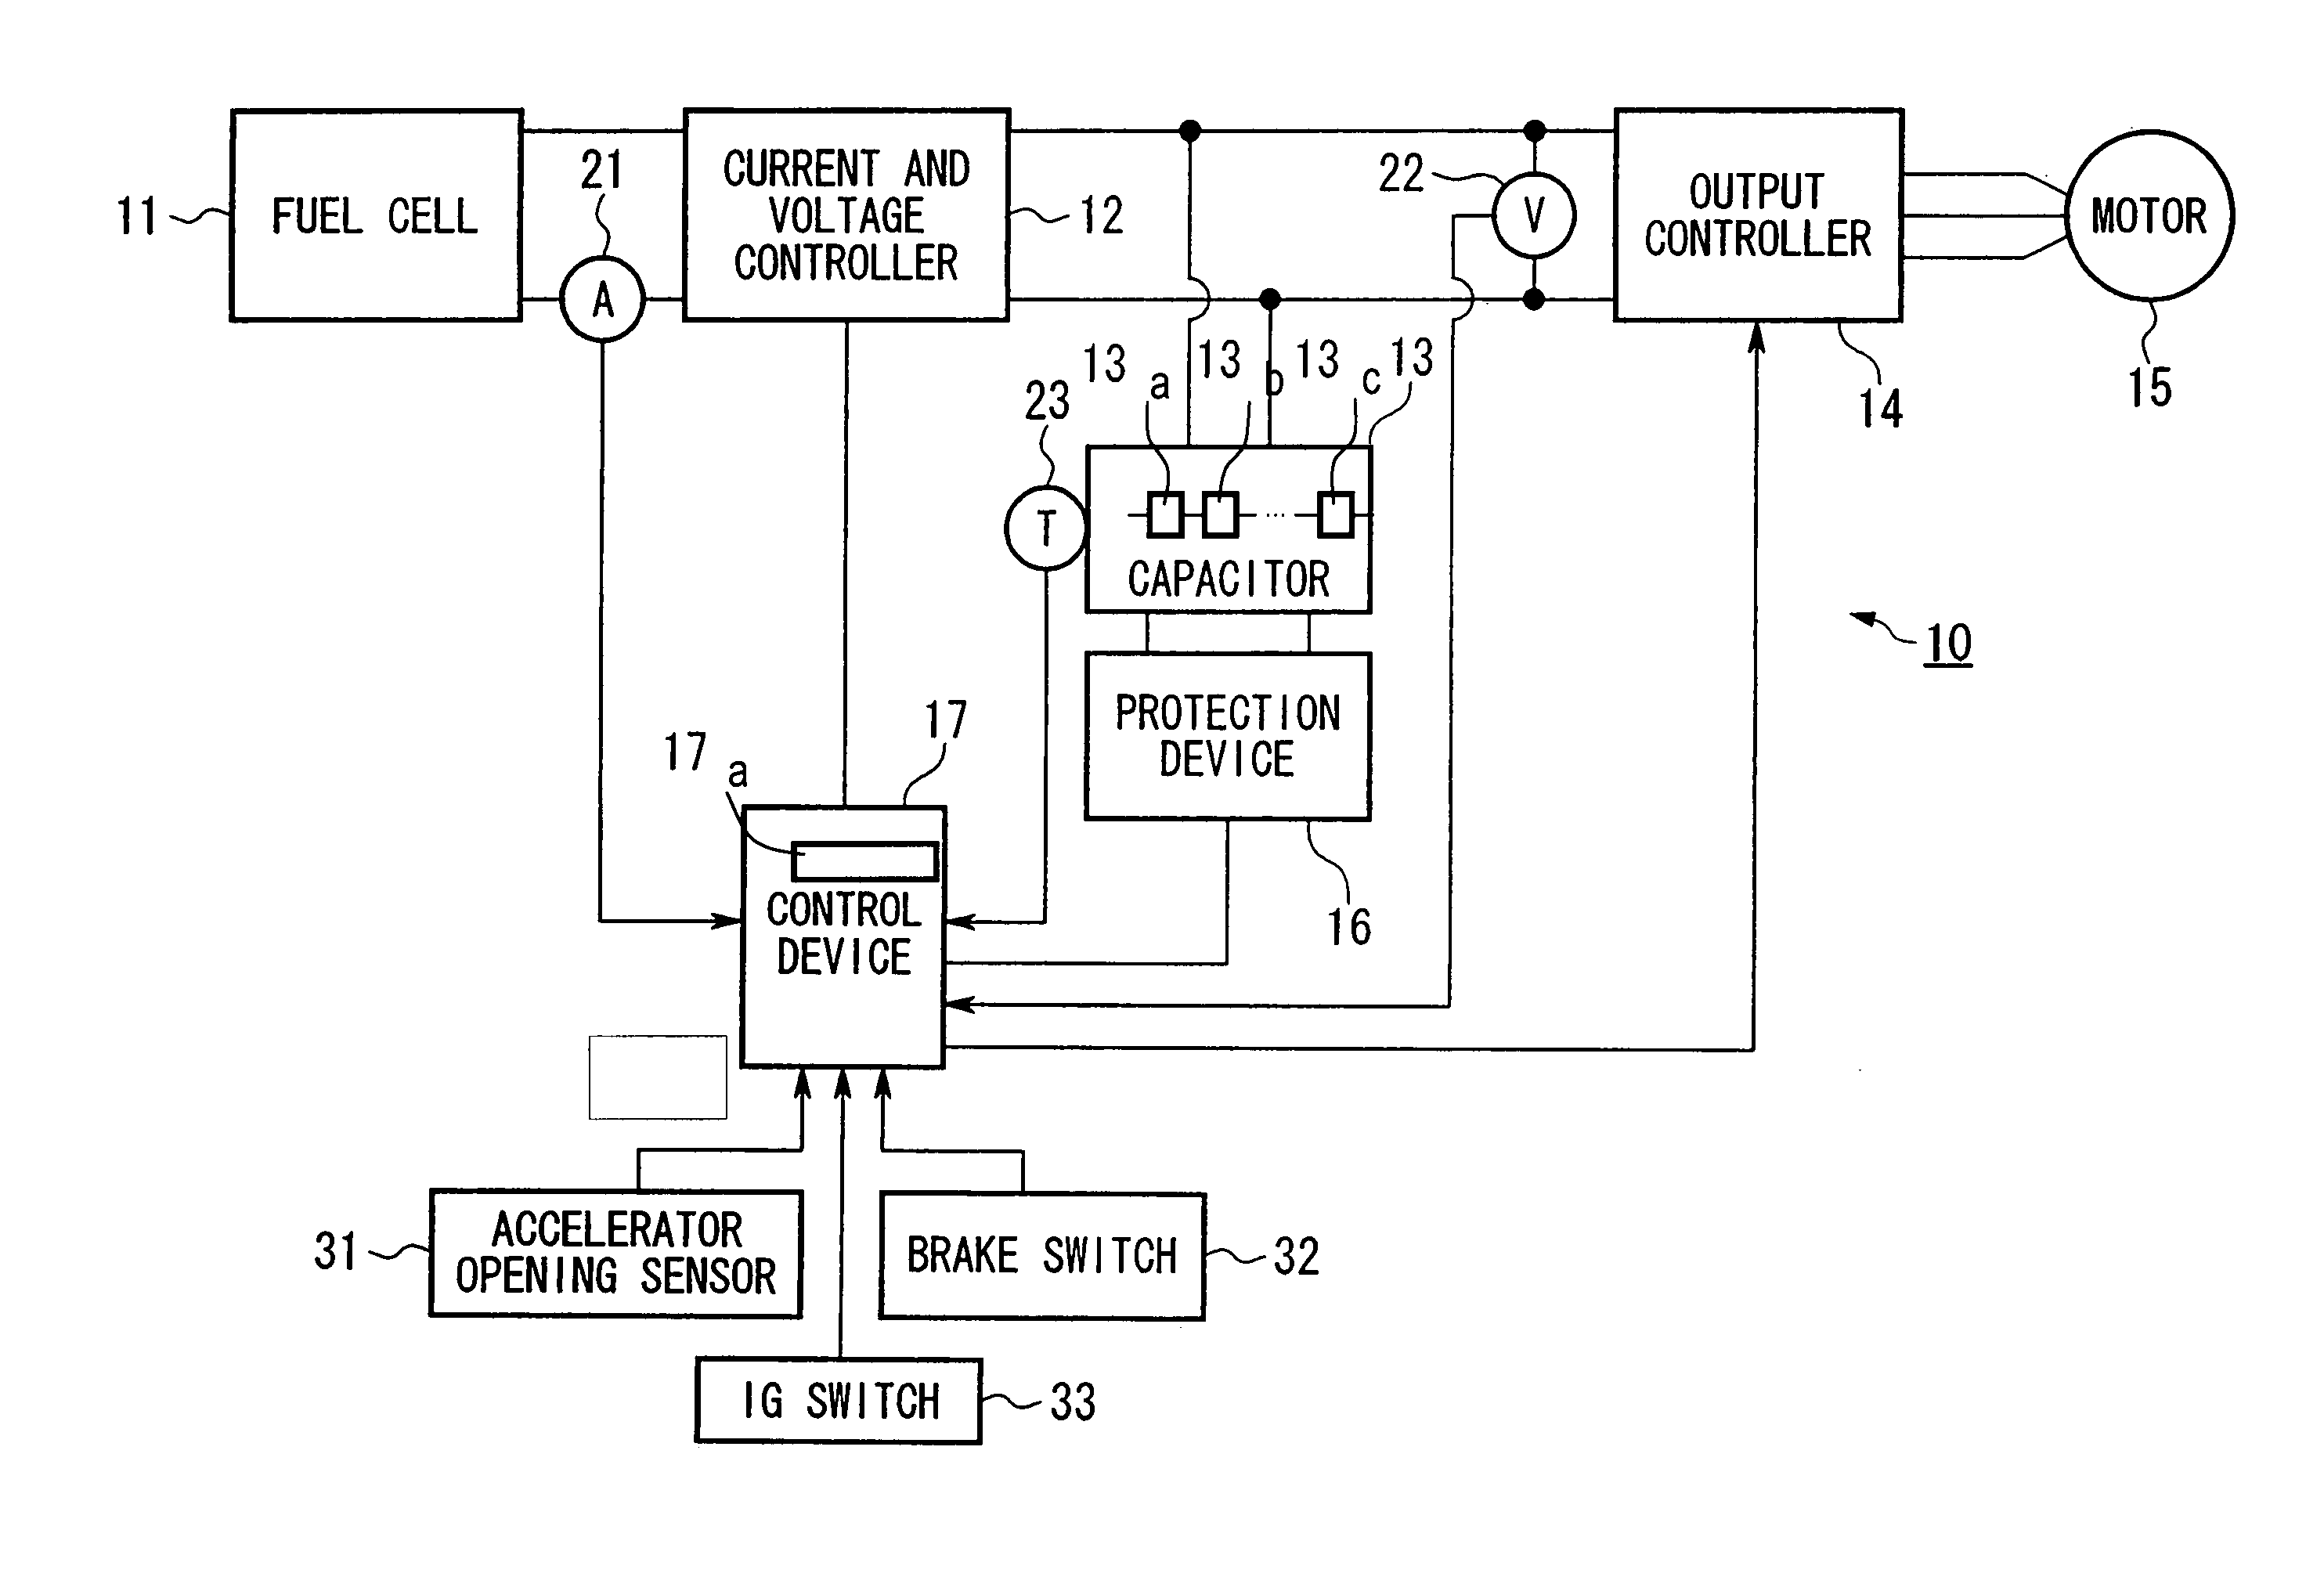 Control apparatus for controlling regenerative operation of vehicle motor